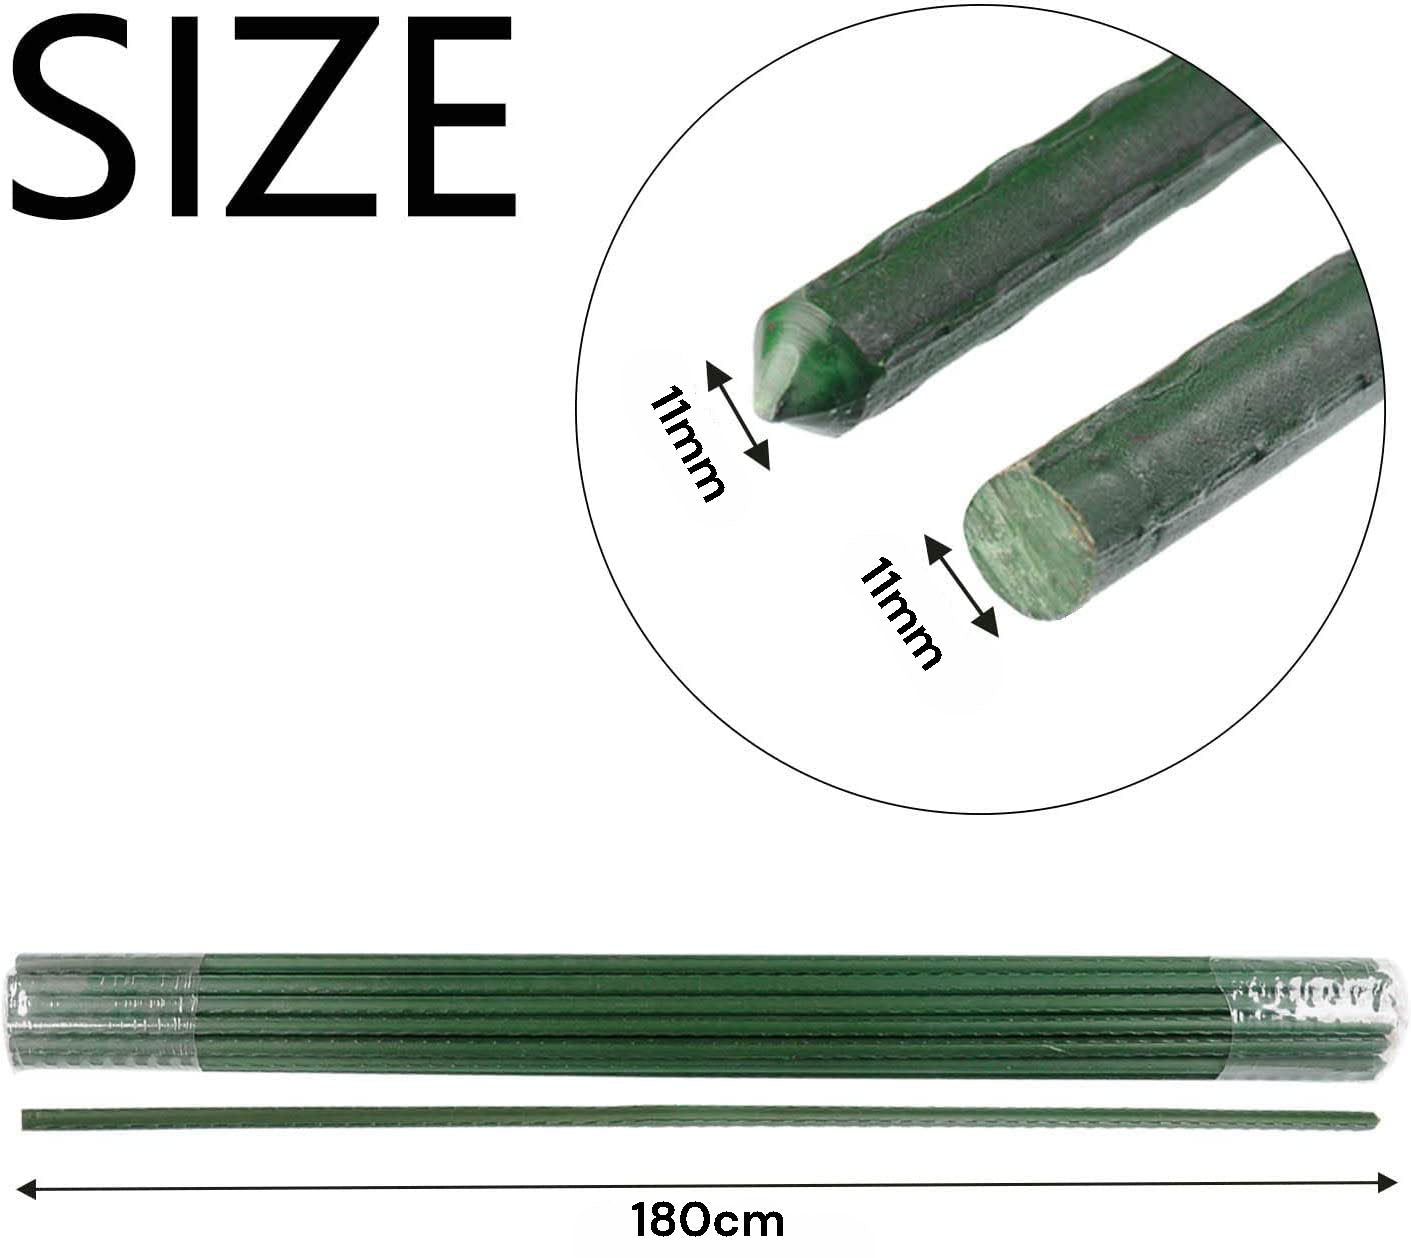 10x 11mm Garden Plant Stakes 180cm Steel Plant Stick Support Stakes Growing Climbing Plants